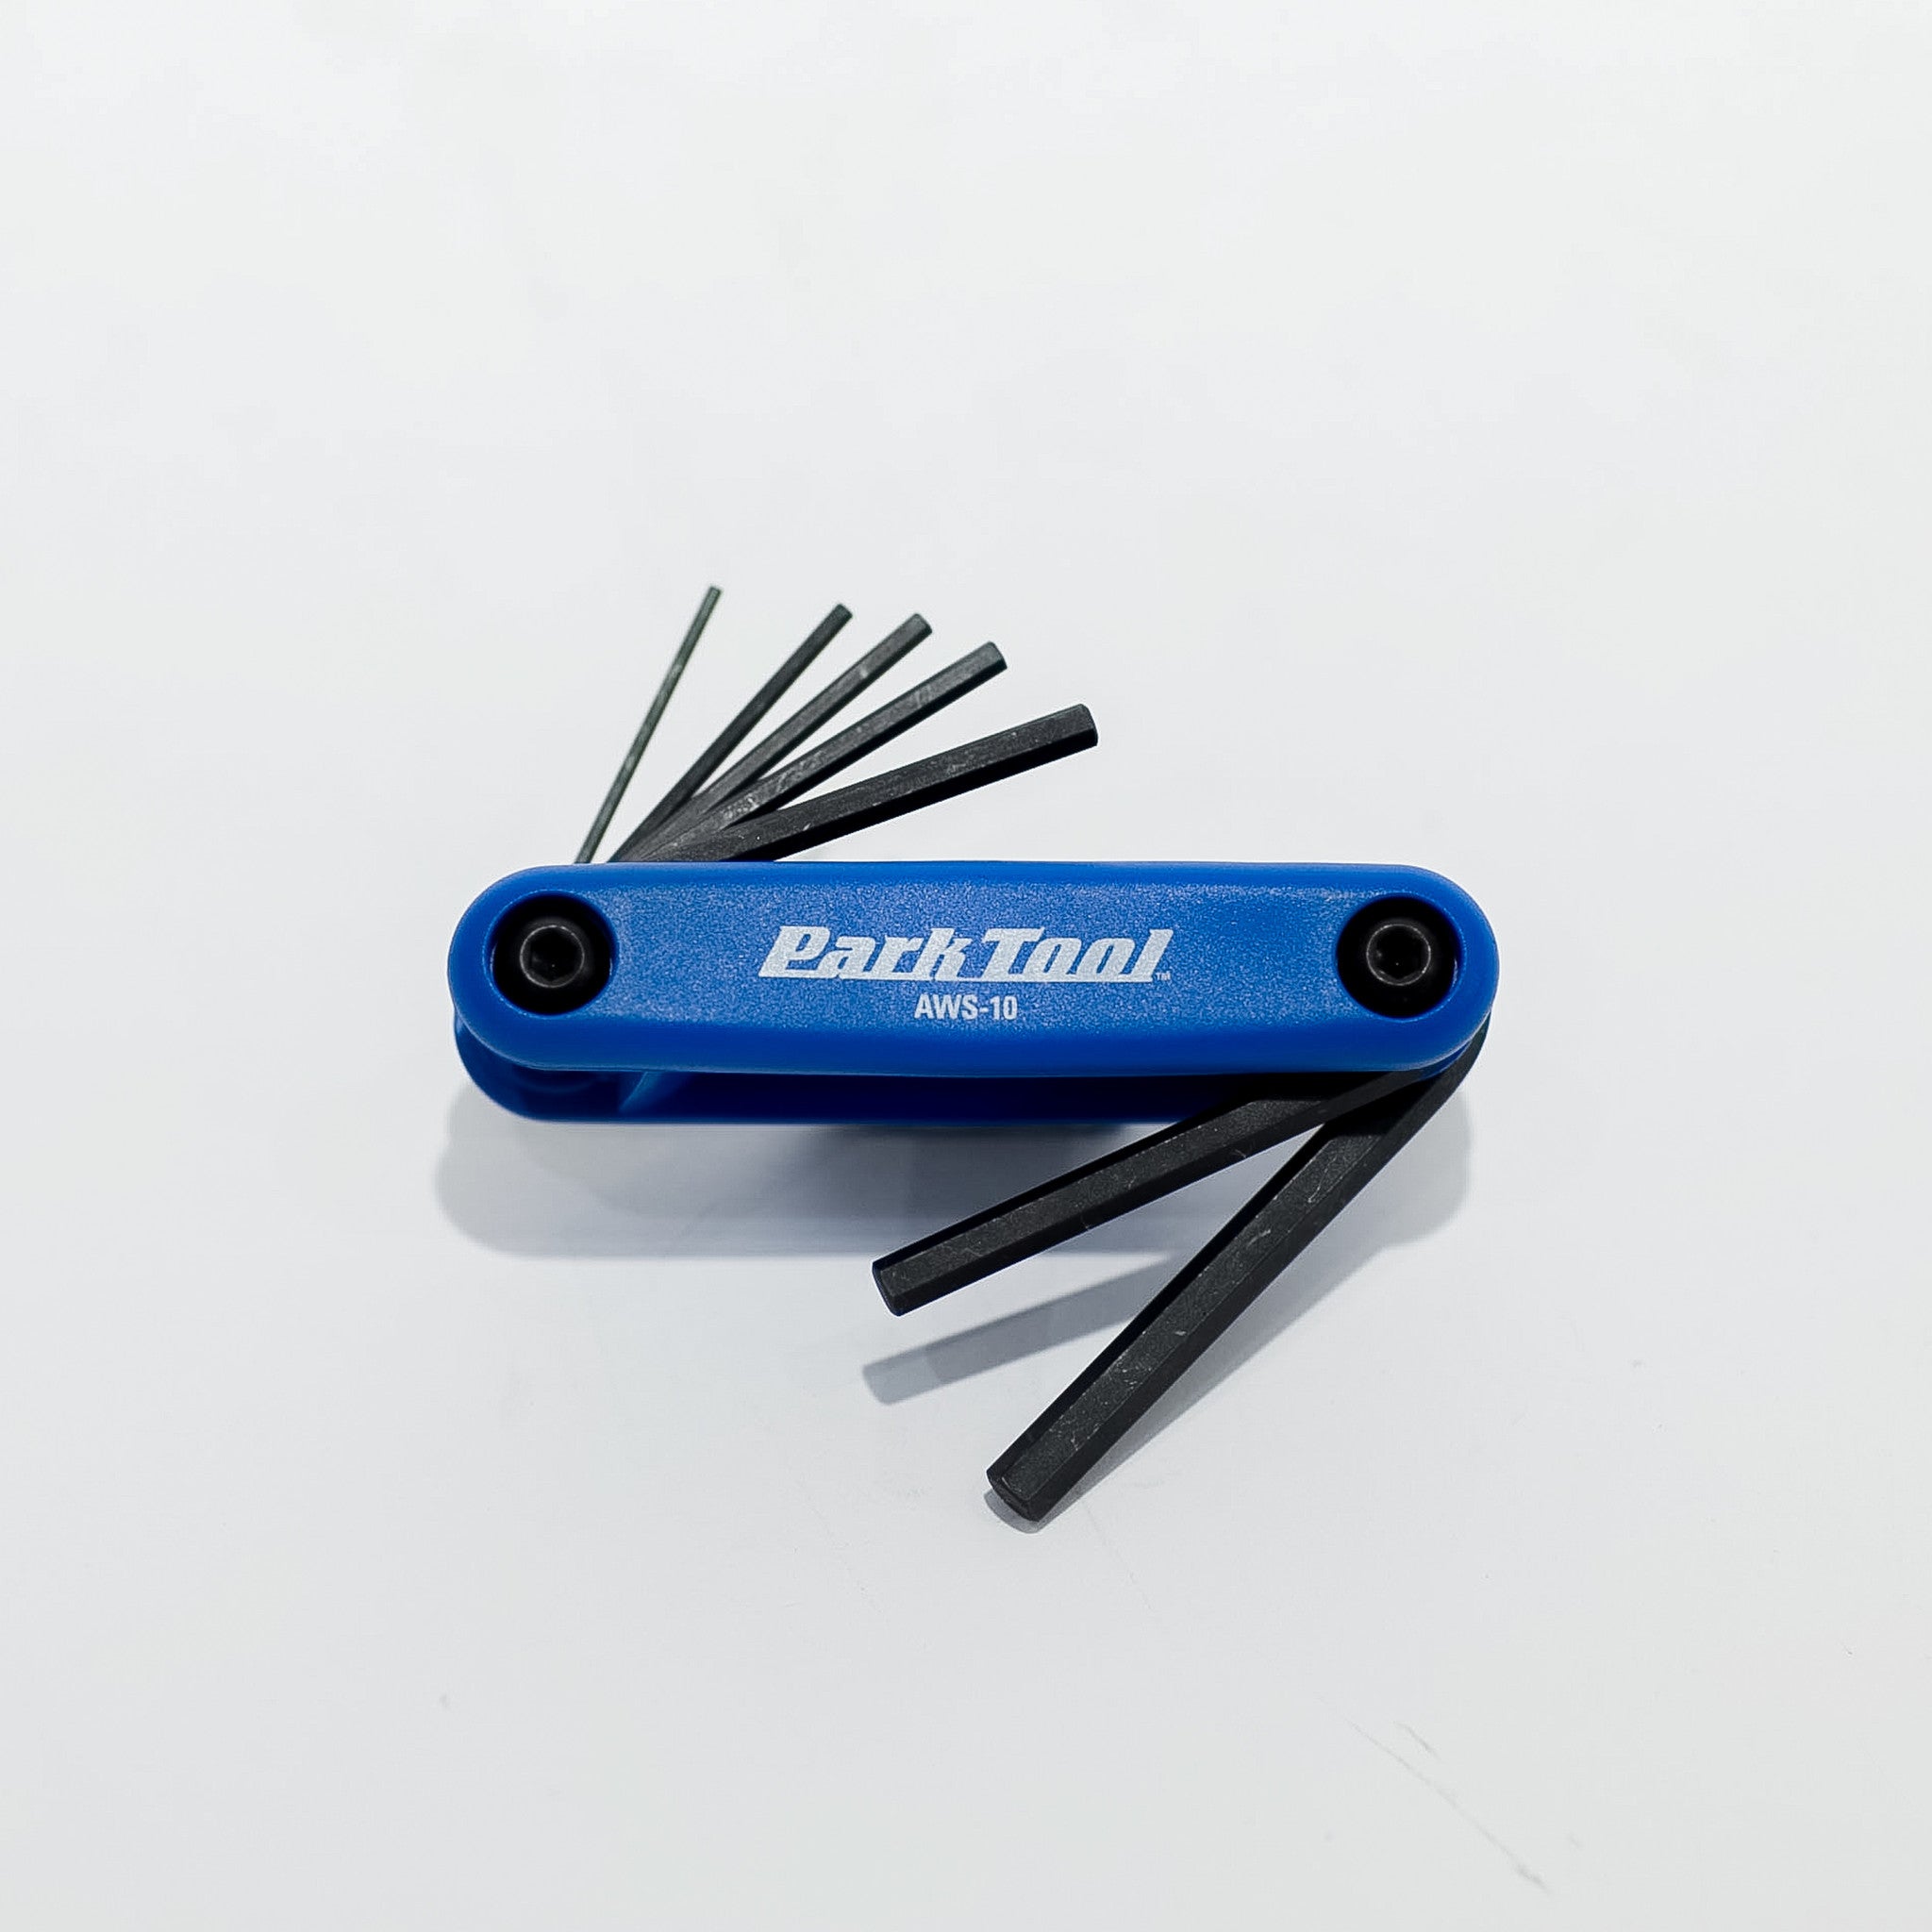 AWS-10 HEX Wrench Set by Park Tool